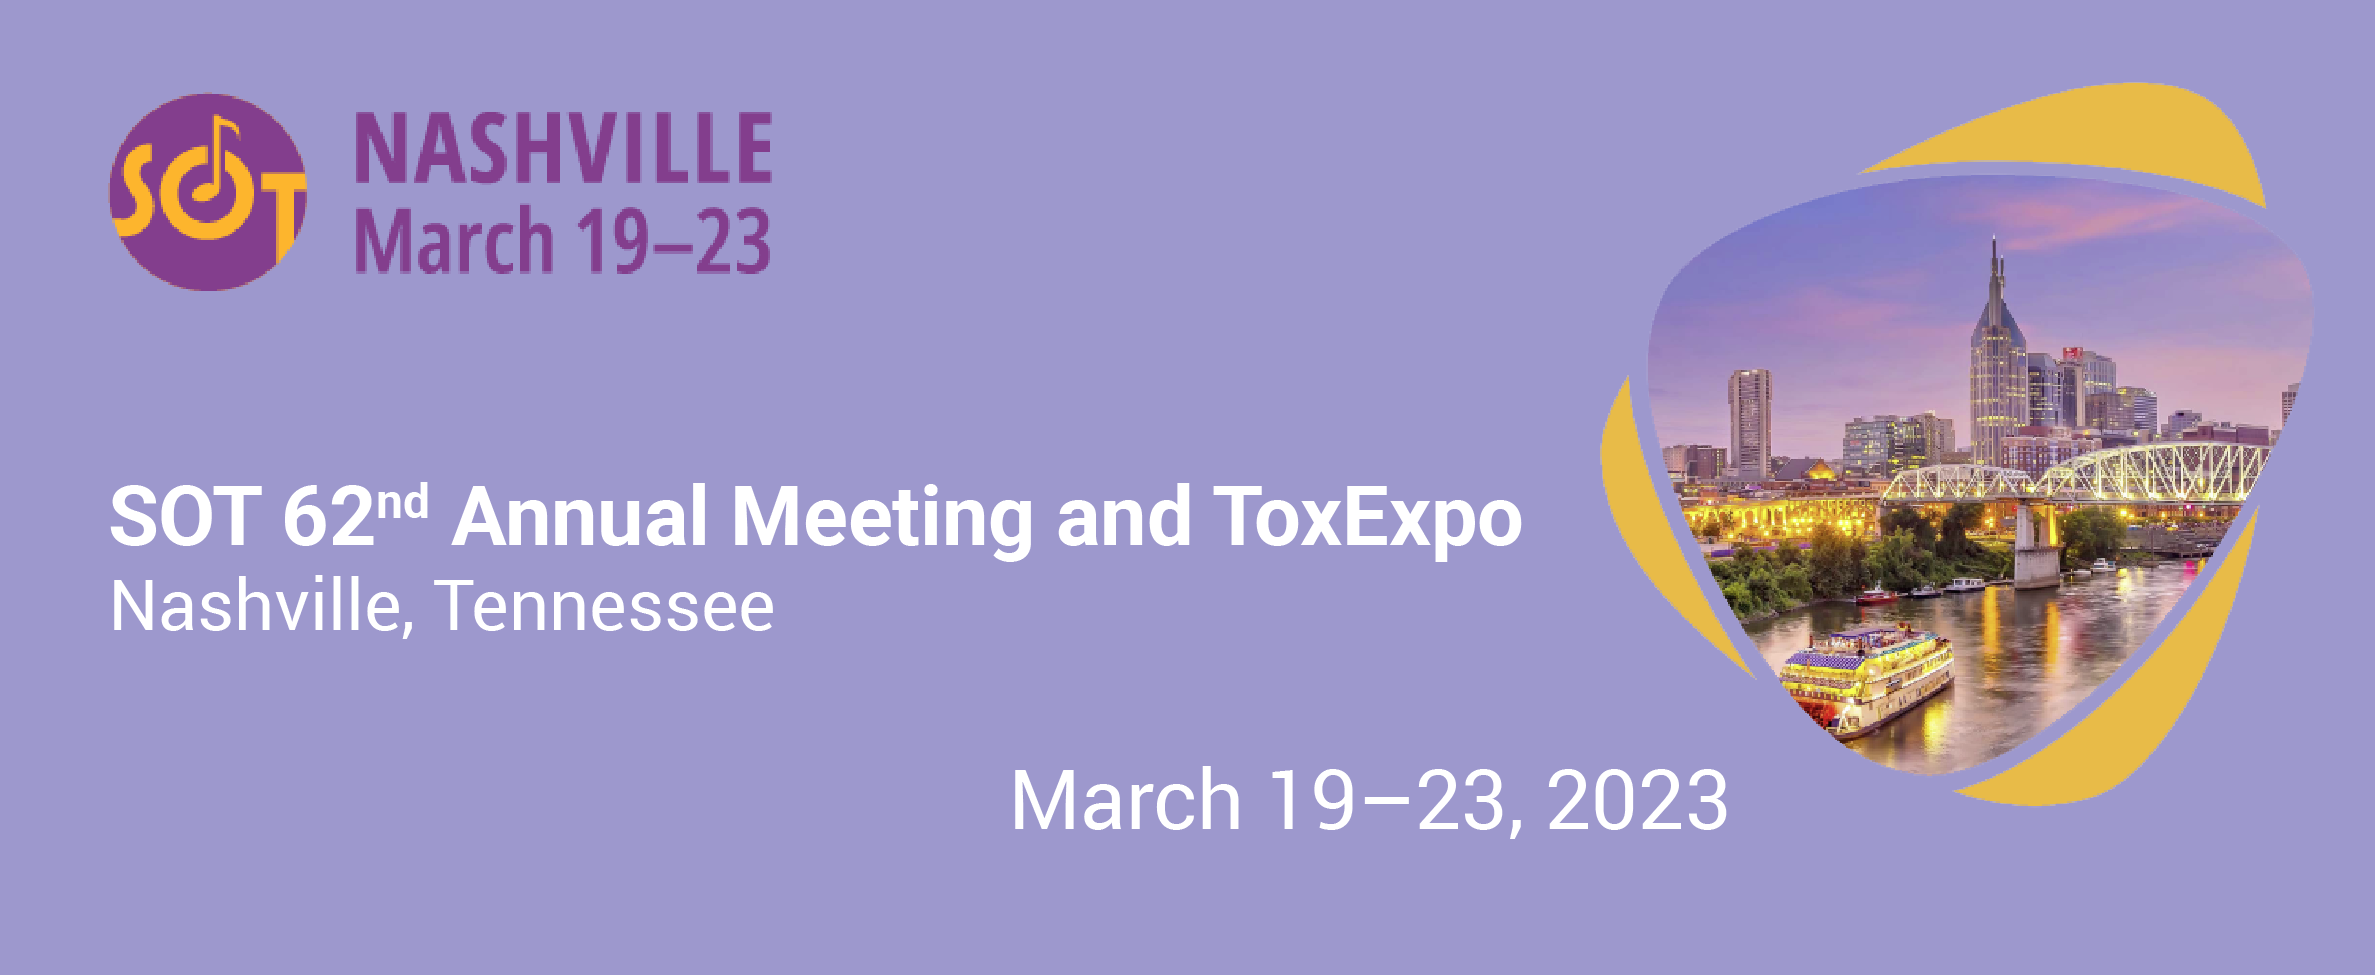 62nd Annual Meeting and ToxExpo - SOT  2023